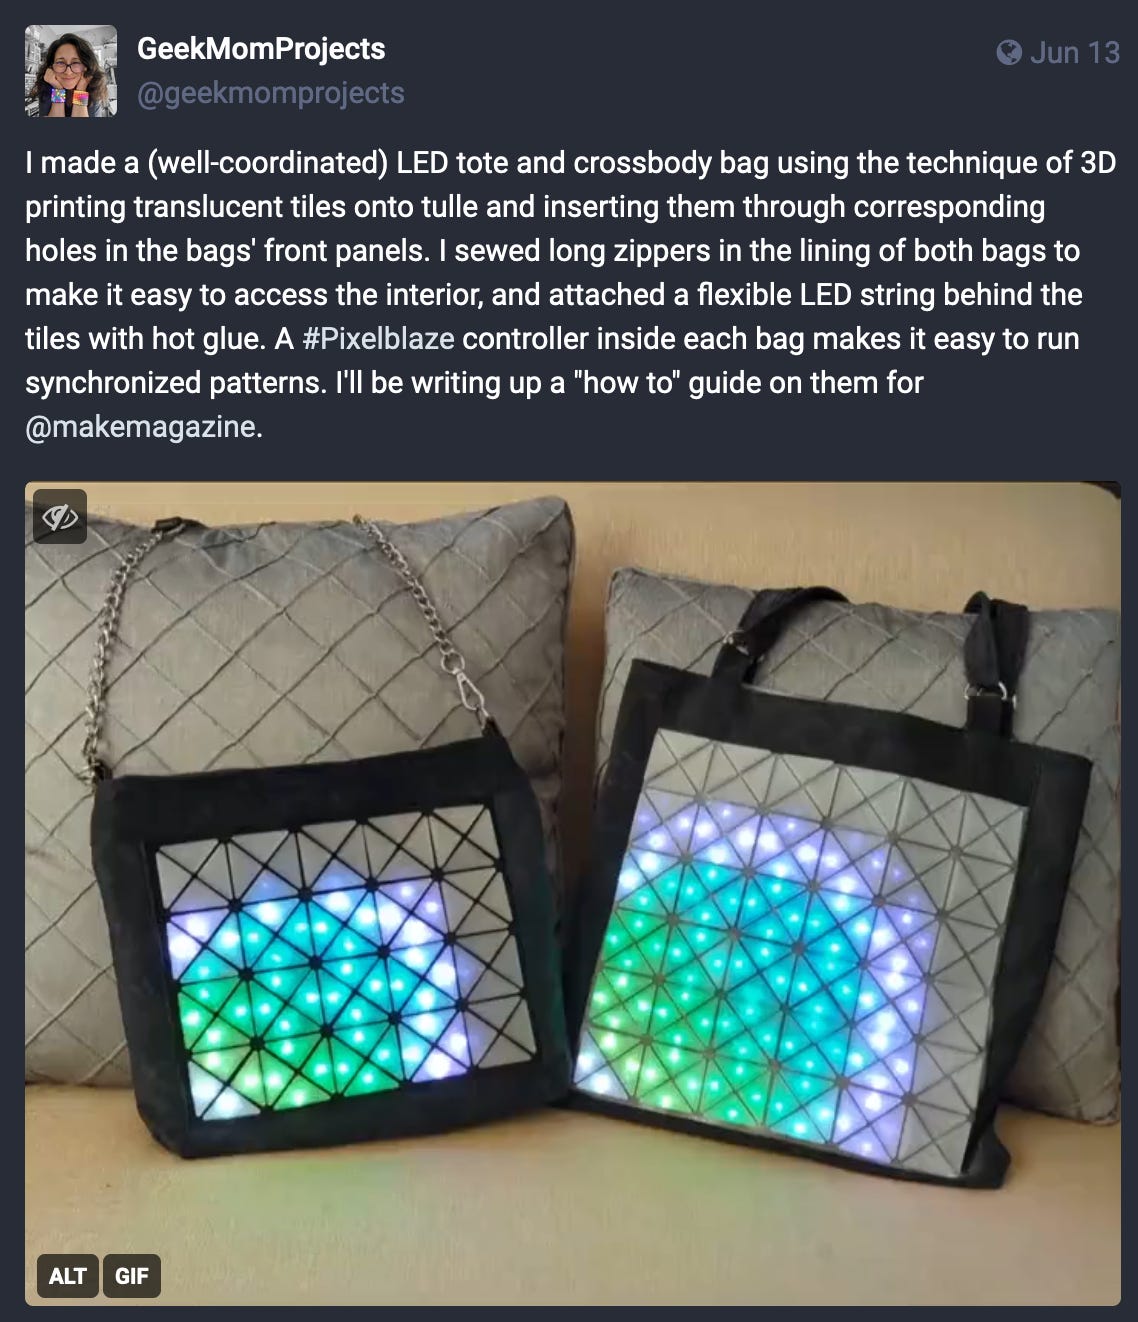 Screenshot of her mastodon post showing an image of two bags made with triangles tesselated into squares, and brinking colourful patterns. post text reads: I made a (well-coordinated) LED tote and crossbody bag using the technique of 3D printing translucent tiles onto tulle and inserting them through corresponding holes in the bags' front panels. I sewed long zippers in the lining of both bags to make it easy to access the interior, and attached a flexible LED string behind the tiles with hot glue. A #Pixelblaze controller inside each bag makes it easy to run synchronized patterns. I'll be writing up a "how to" guide on them for @makemagazine.